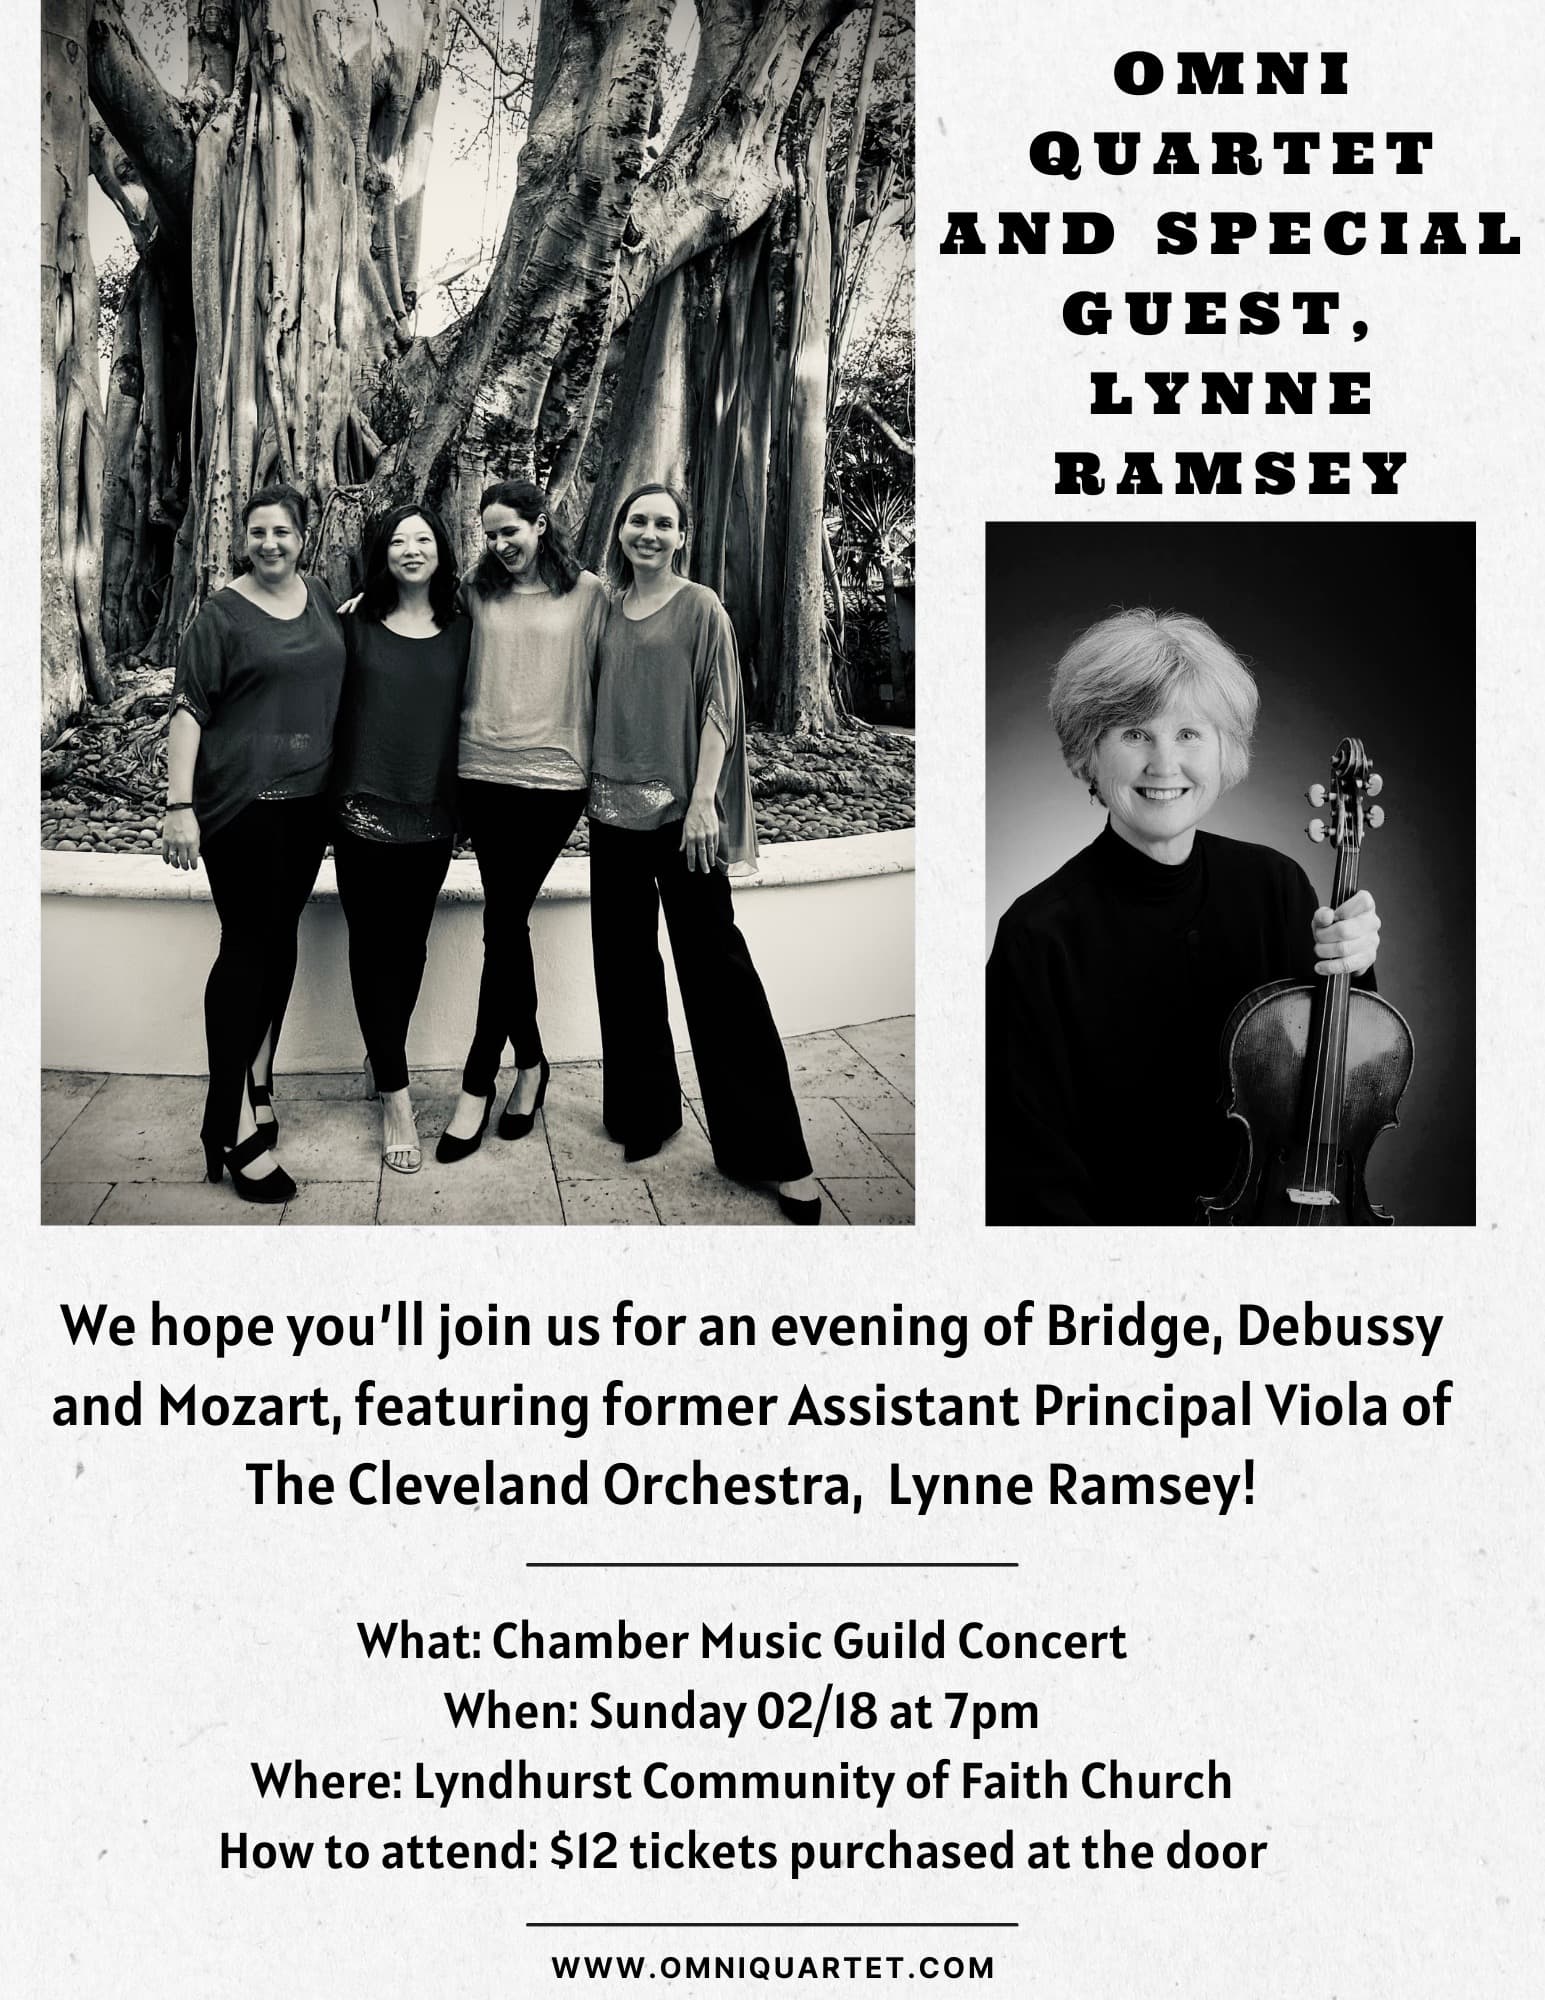 The Omni Quartet and special guest, Lynne Ramsey